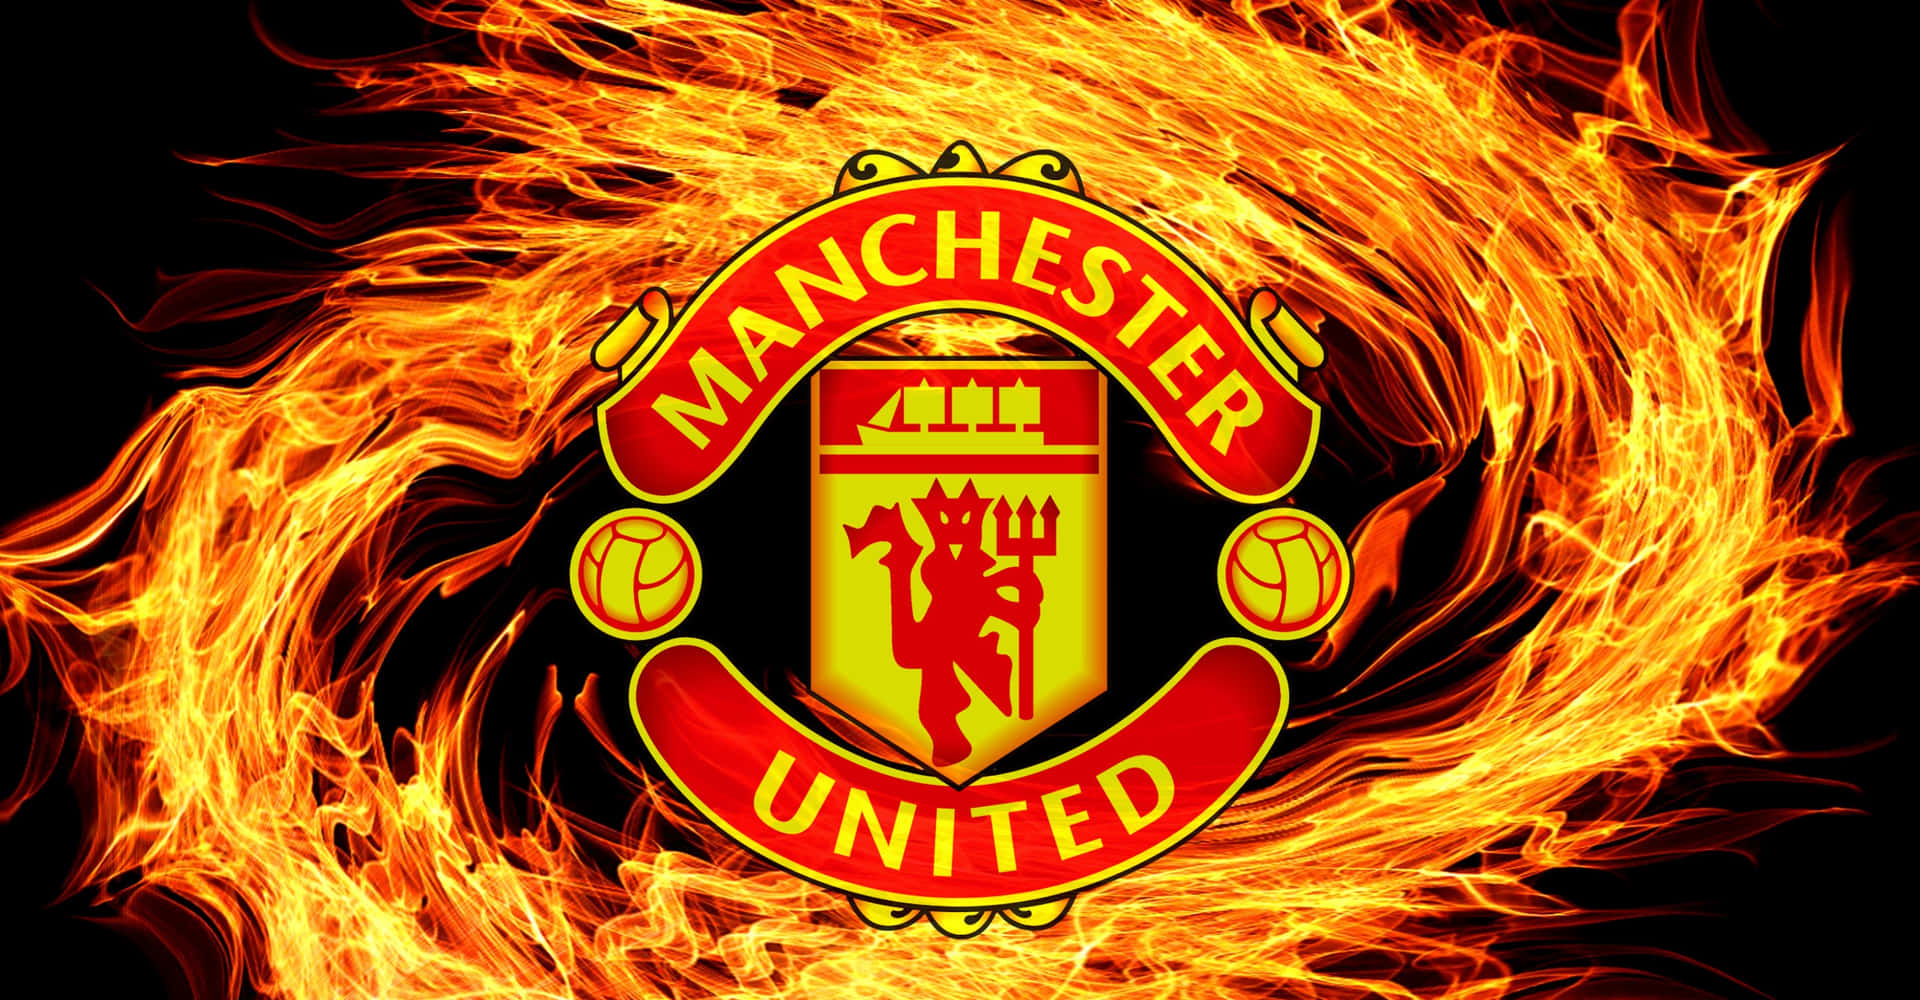 Manchester United Team With Flames Wallpaper